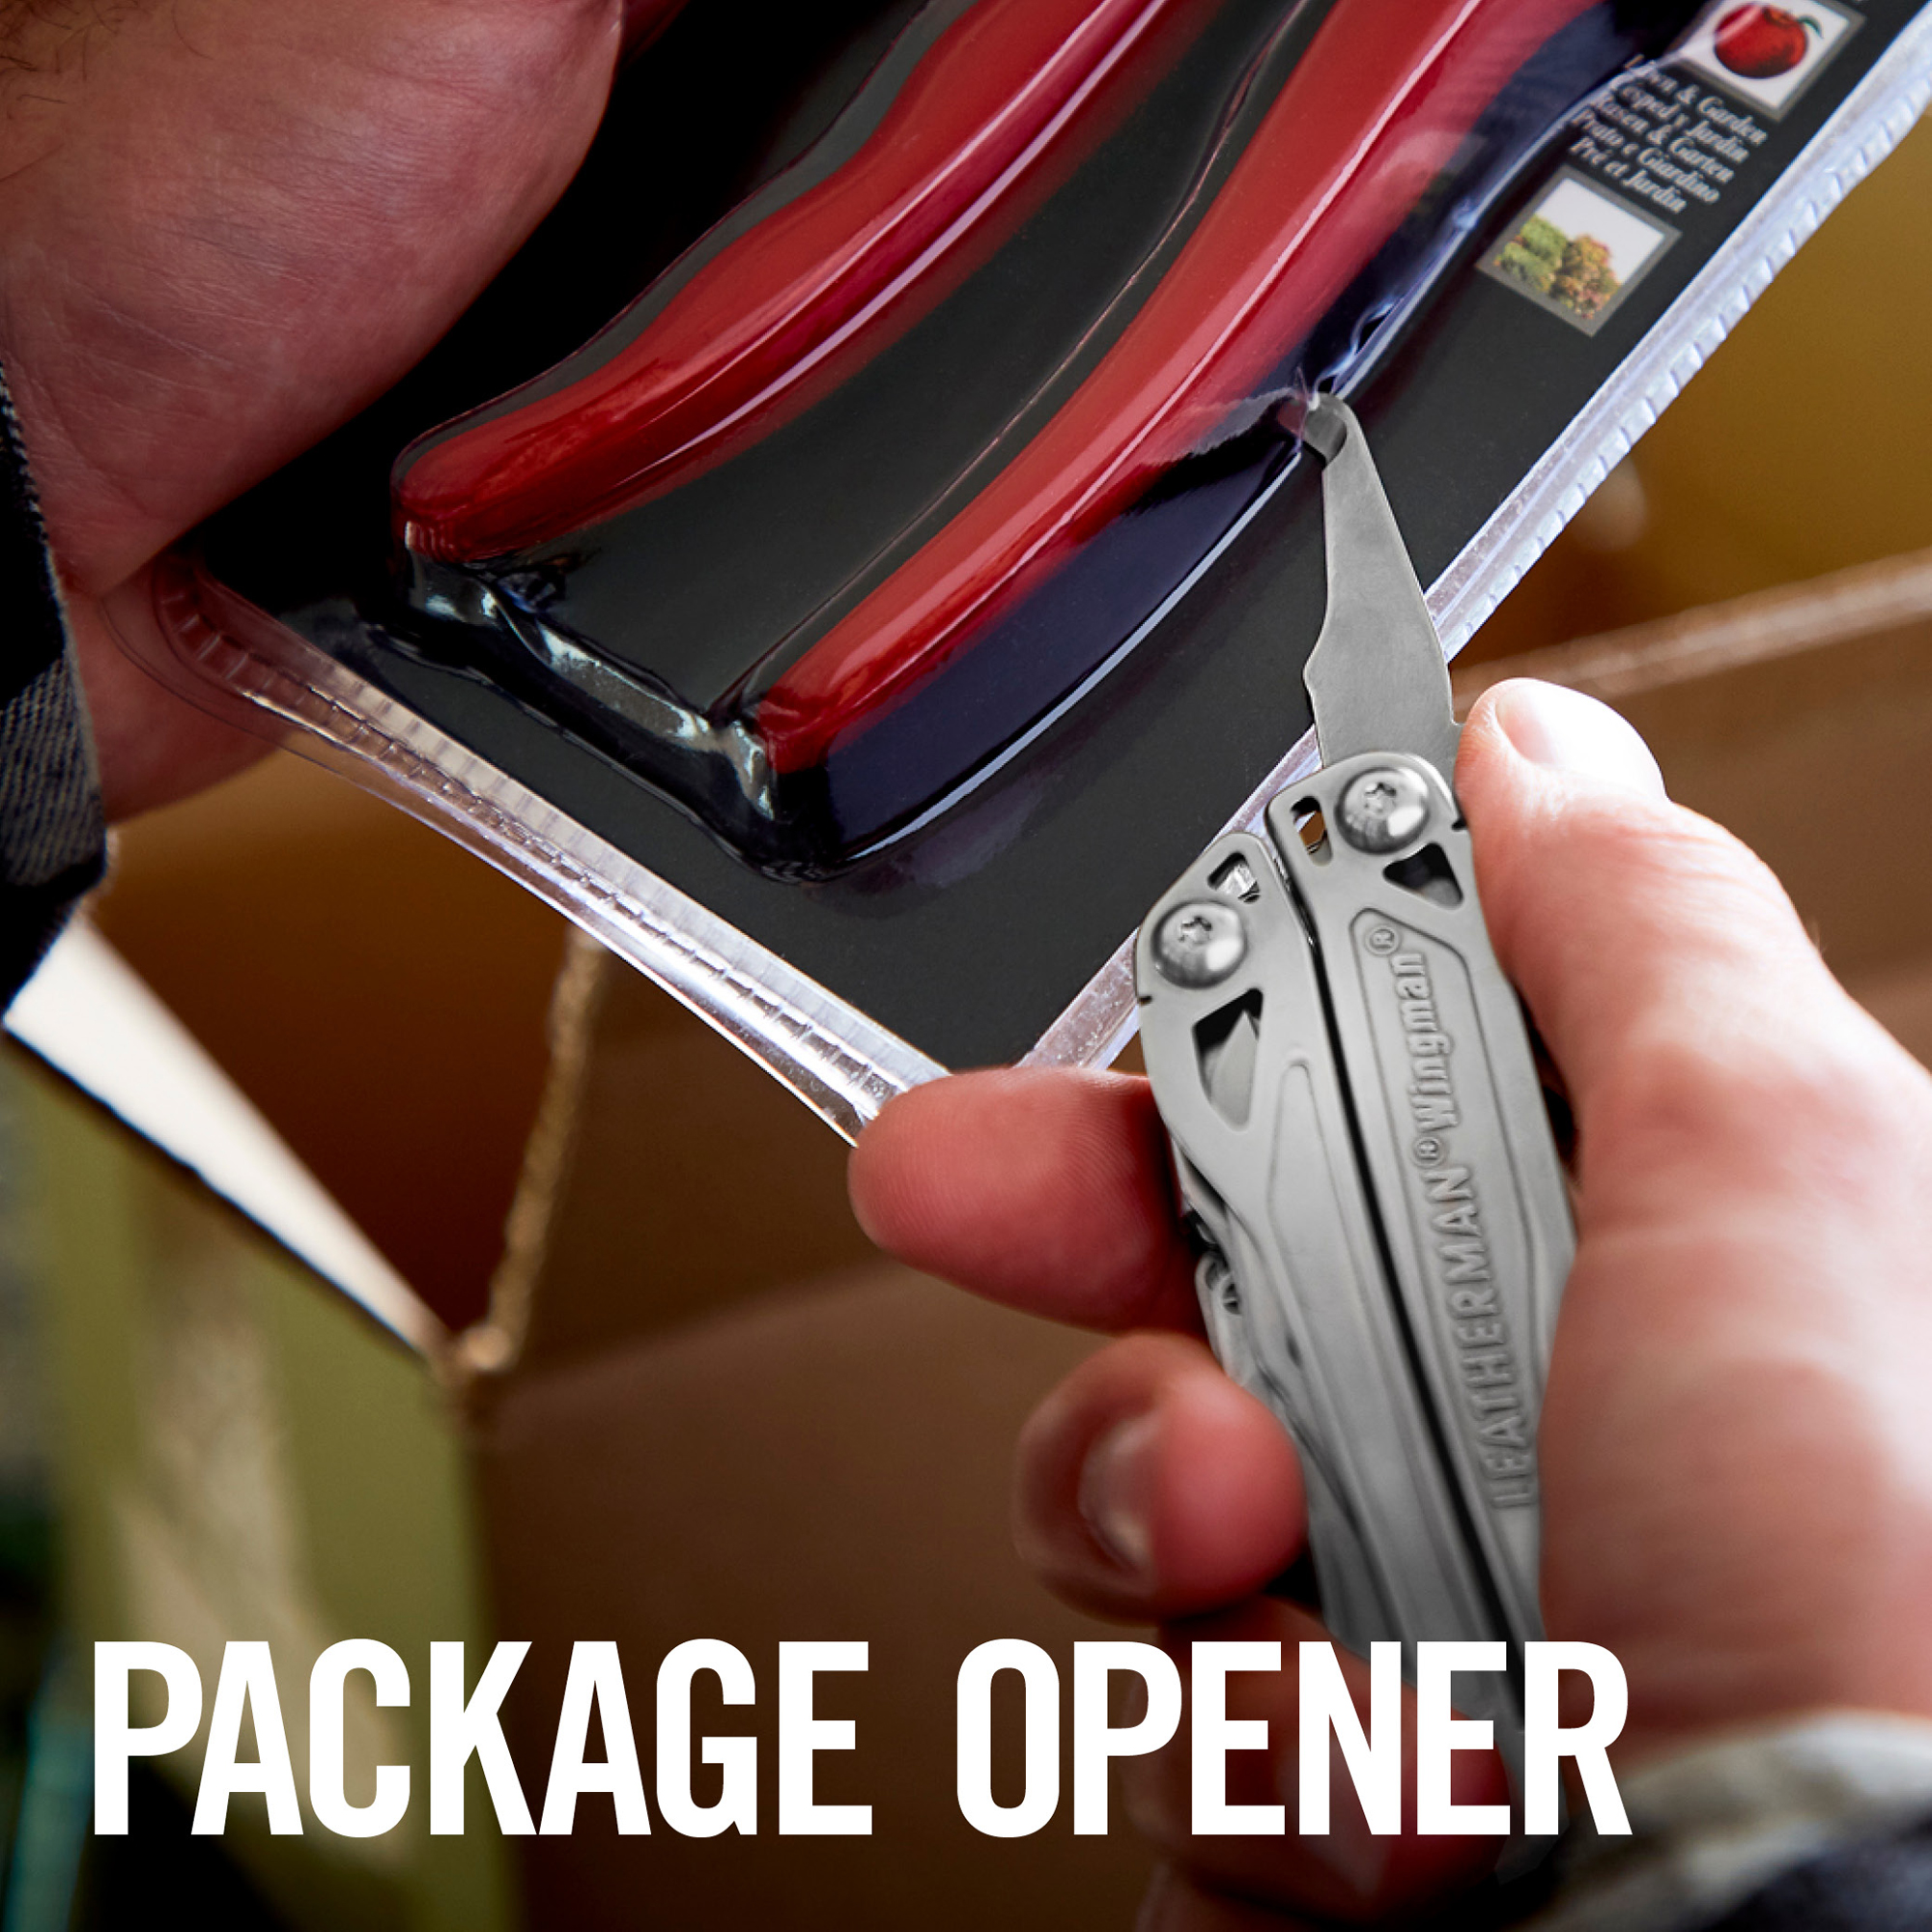 LEATHERMAN, Wingman Multitool with Spring-Action Pliers and Scissors, Stainless Steel with Nylon Sheath - image 5 of 9